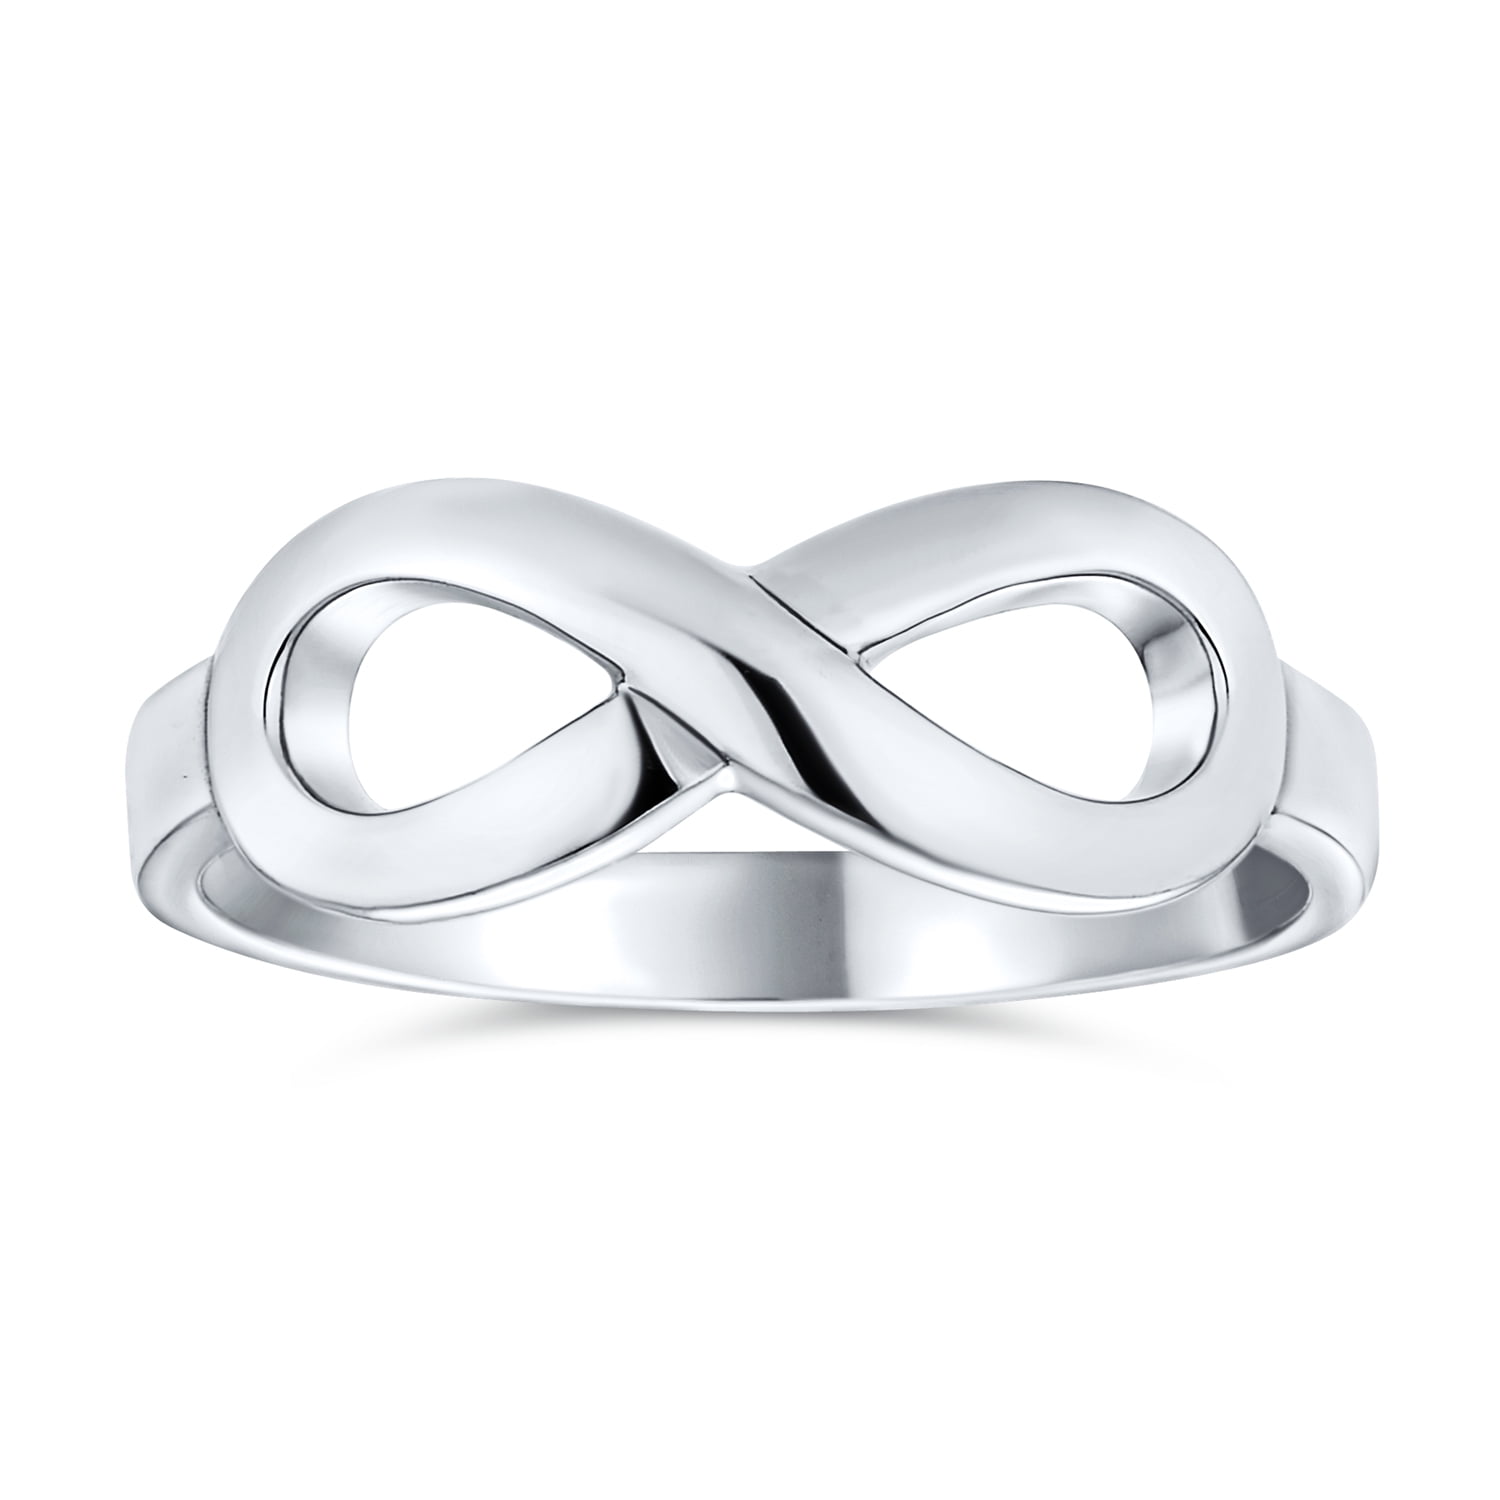 Solid Sterling Silver 925 Best Friend Forever Double Infinity Friendship Ring